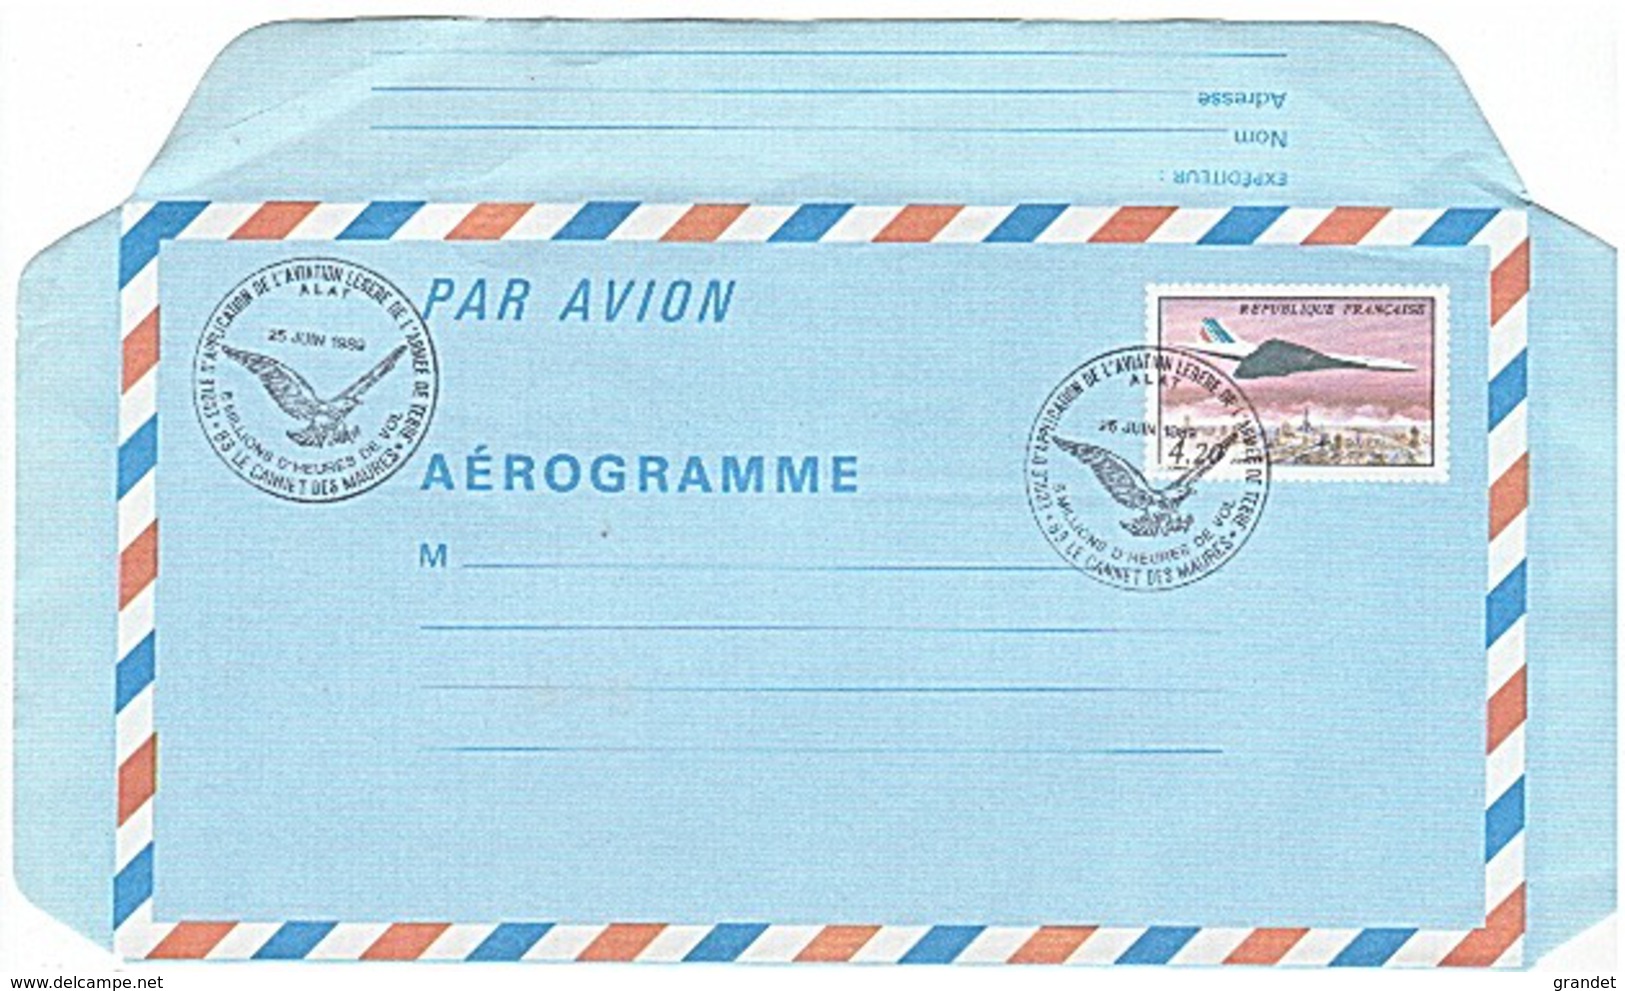 AVIATION - LE - CANNET - DES - MAURES - CONCORDE - ALAT - AEROGRAMME - 1989 - - Military Airmail